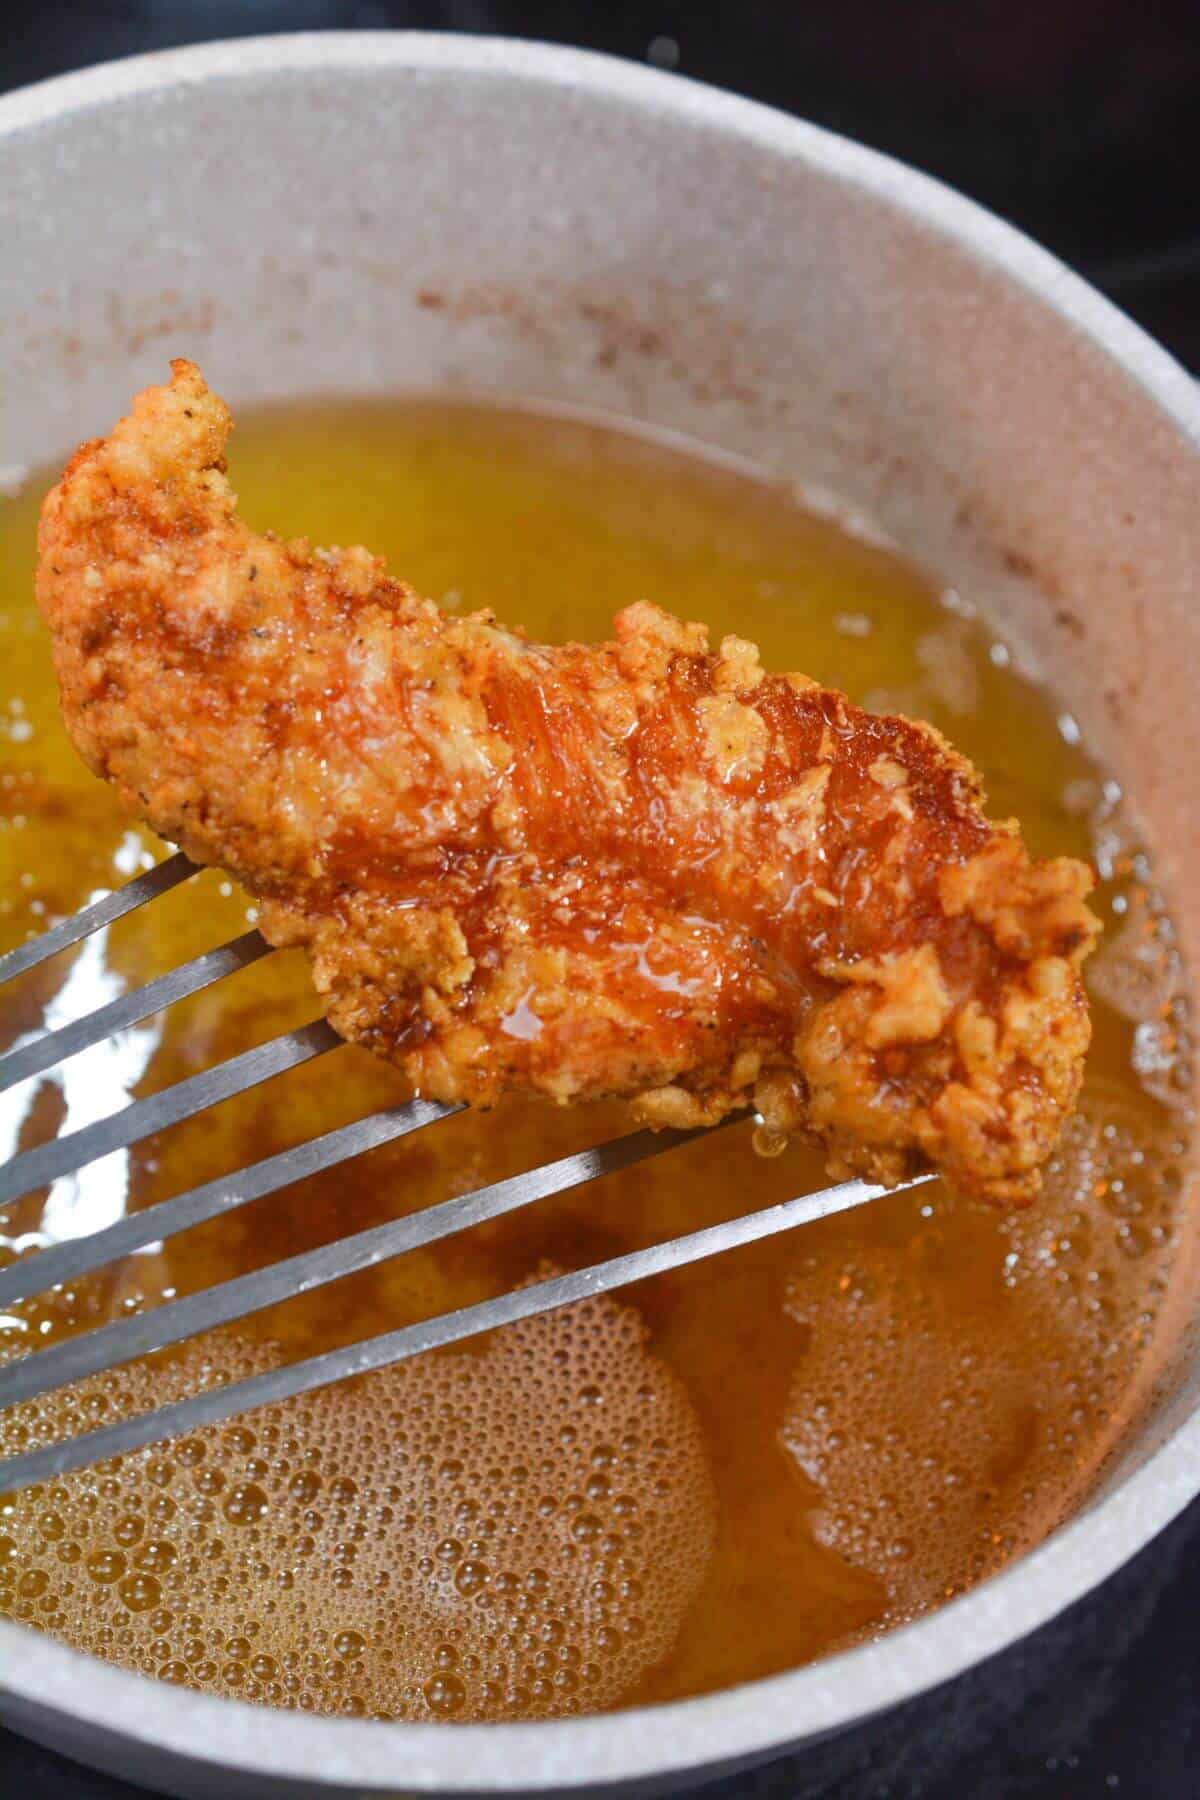 Removing fried chicken from oil.